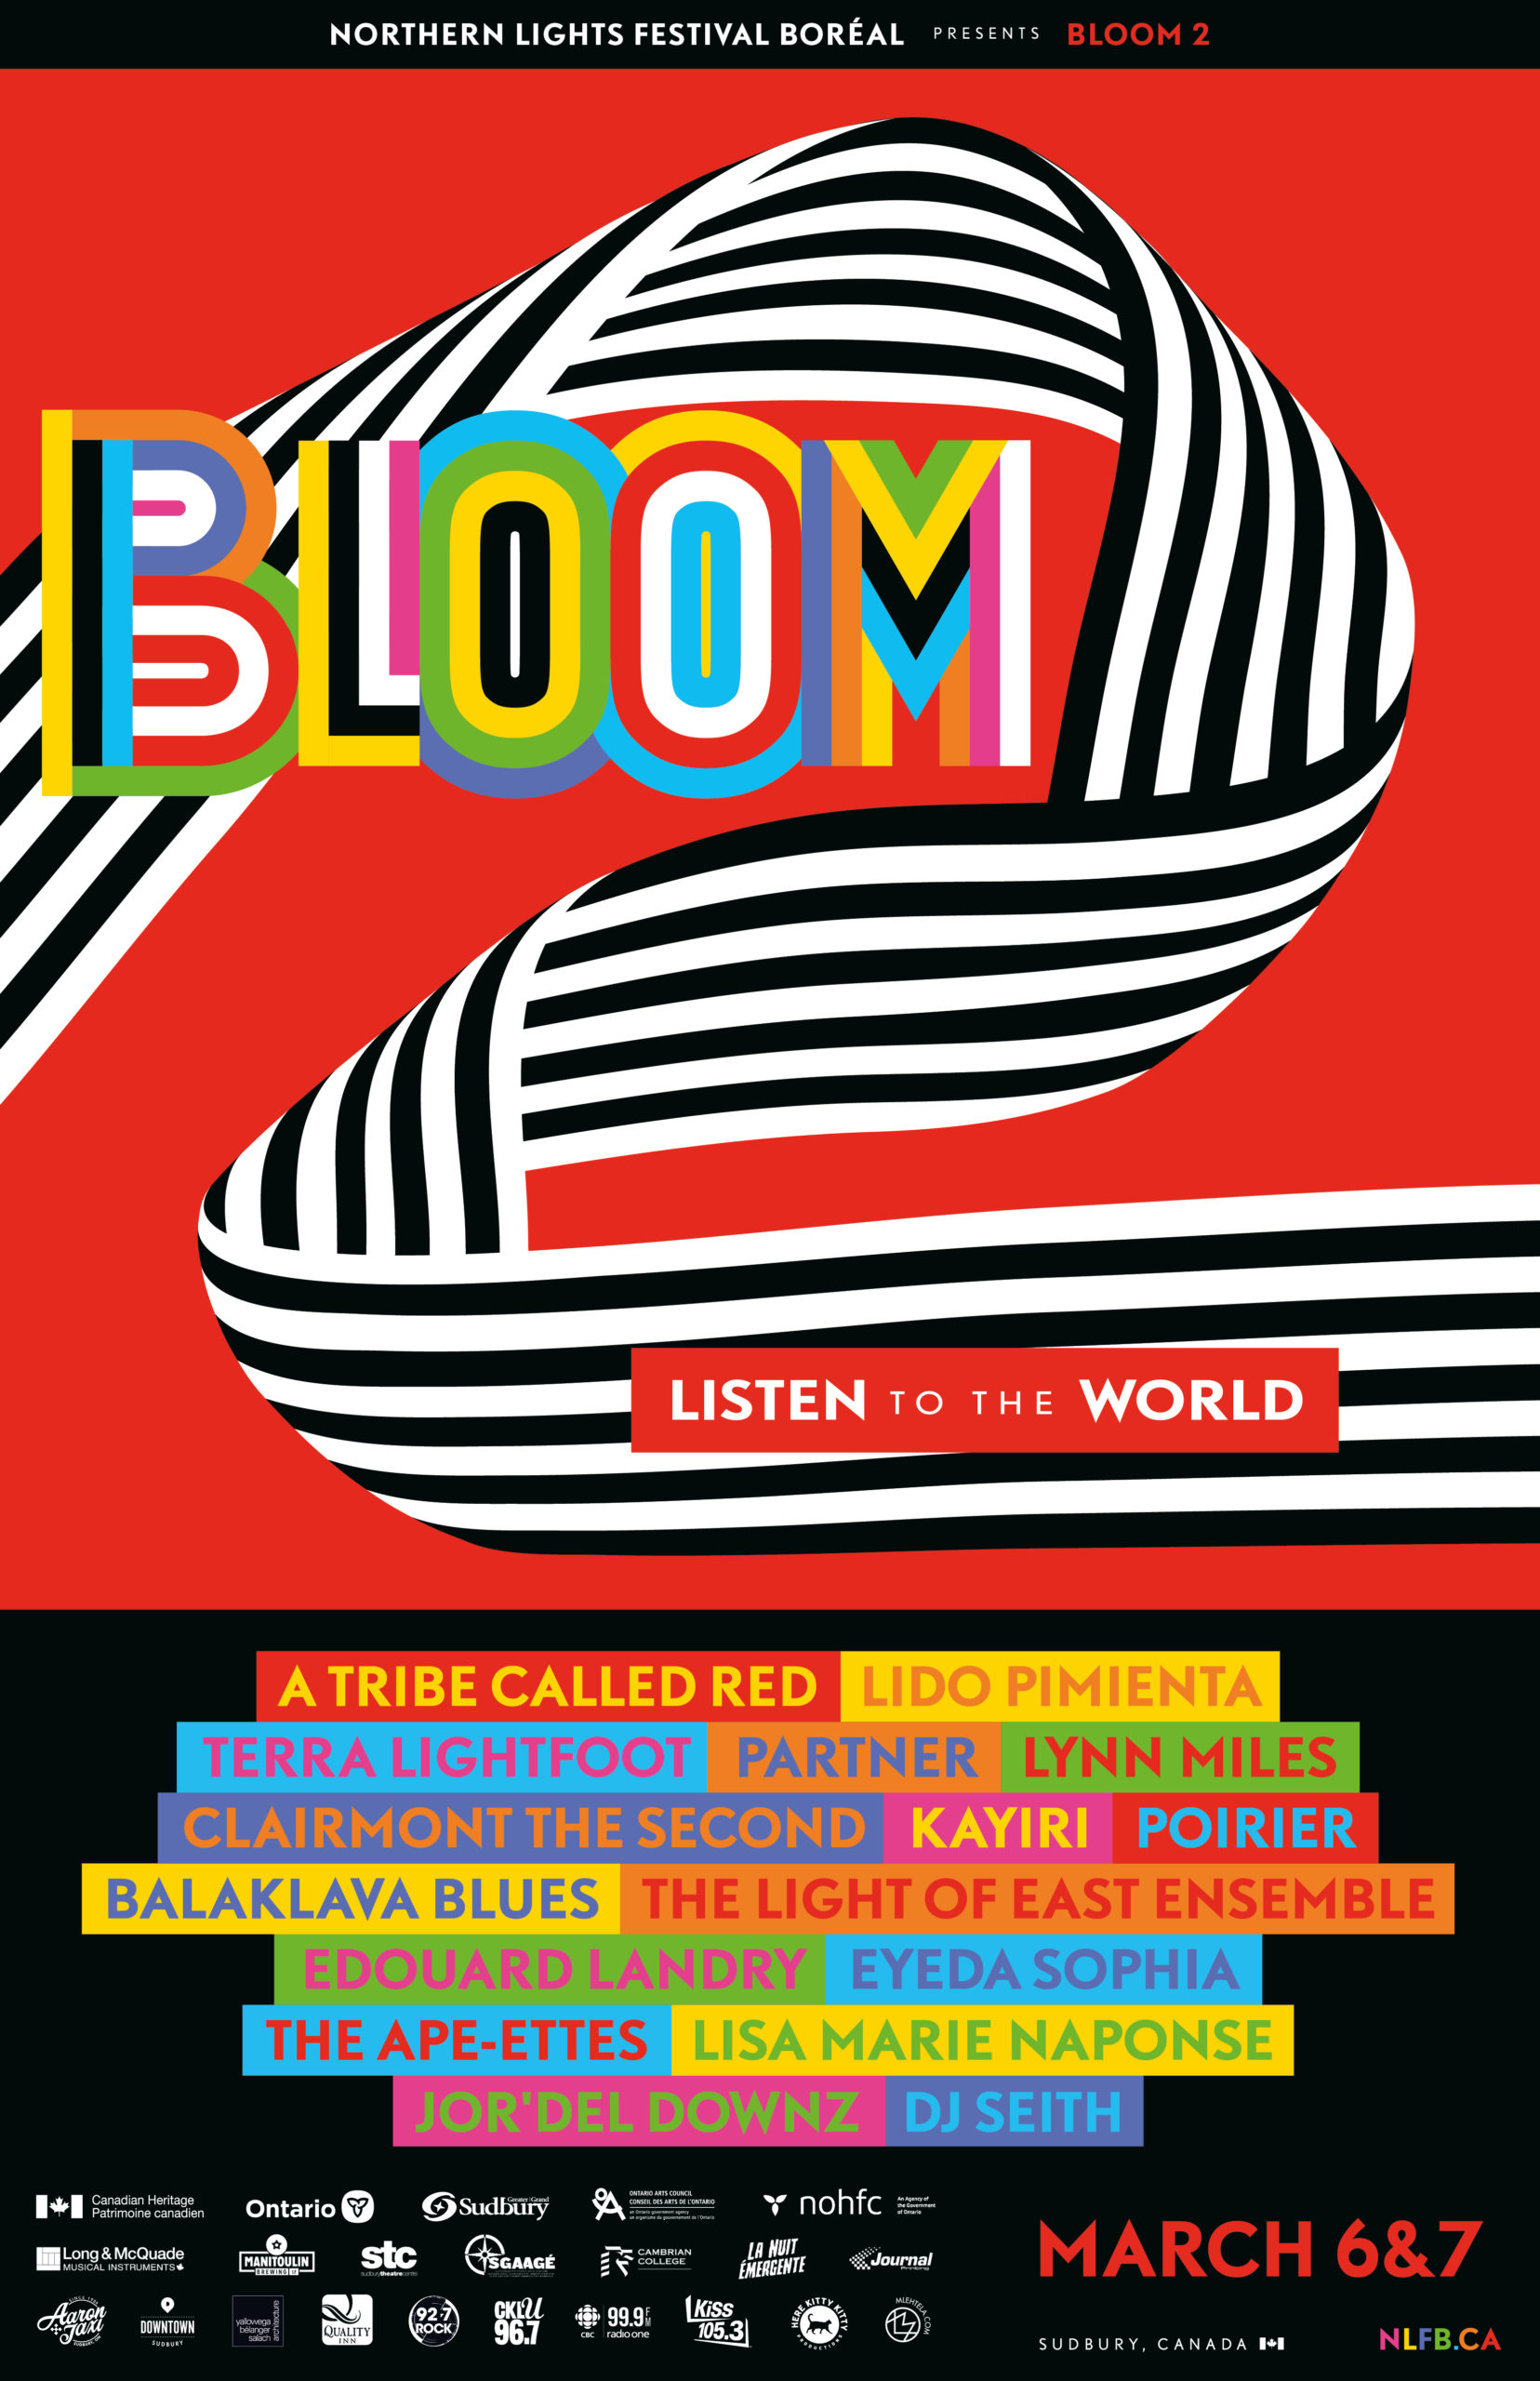 LISTEN TO THE WORLD AT BLOOM 2